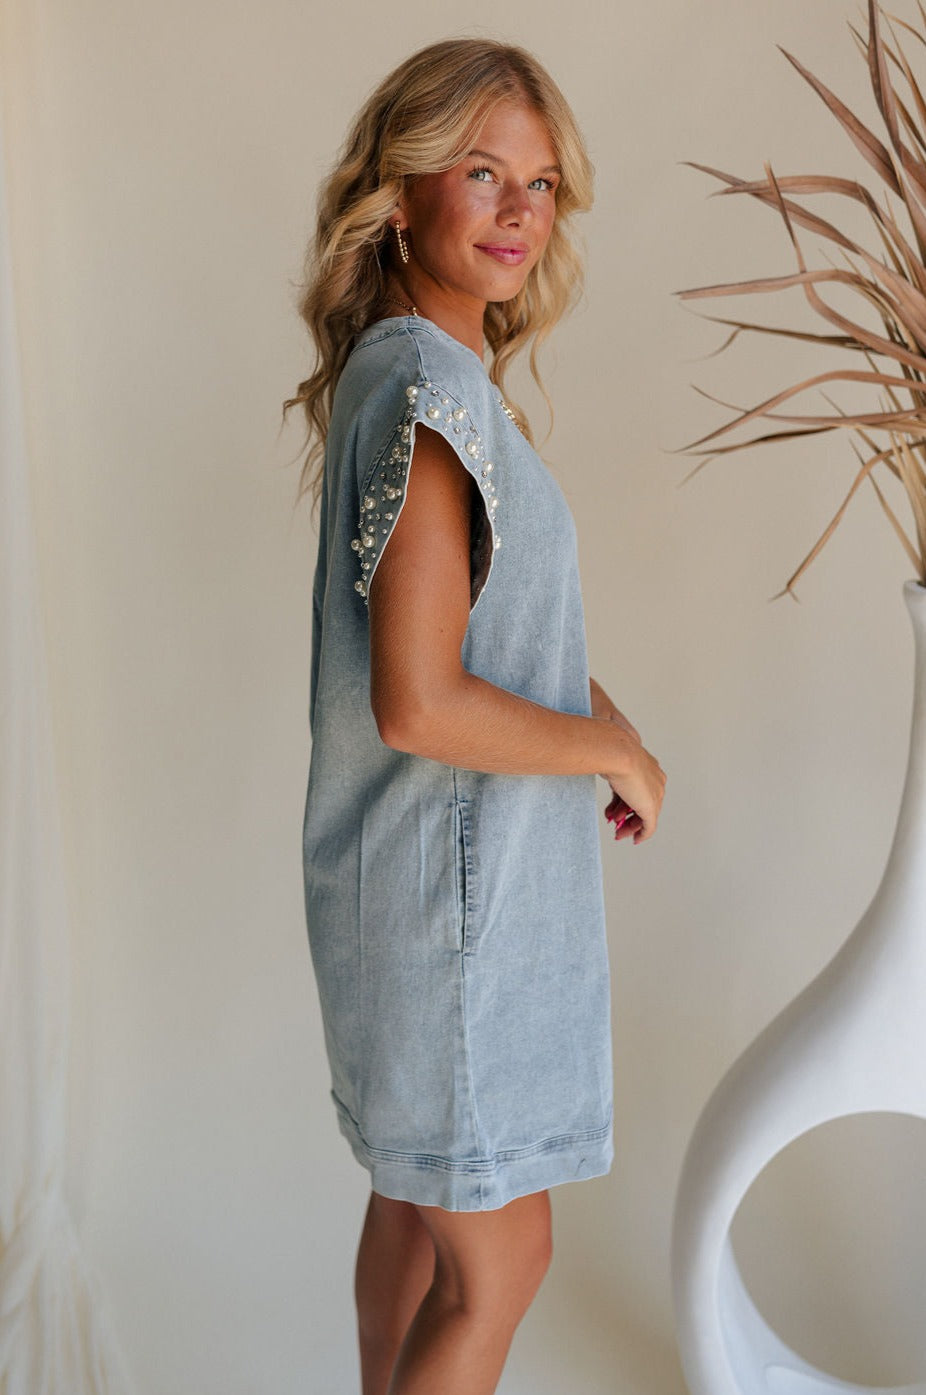 side view of female model wearing the Raelyn Light Denim Pearl & Rhinestone Mini Dress which features Light Denim Wash Fabric, Side Pockets, Pearl and Rhinestone Details, Round Neckline, Short Sleeves and Back Zipper with Hook Closure